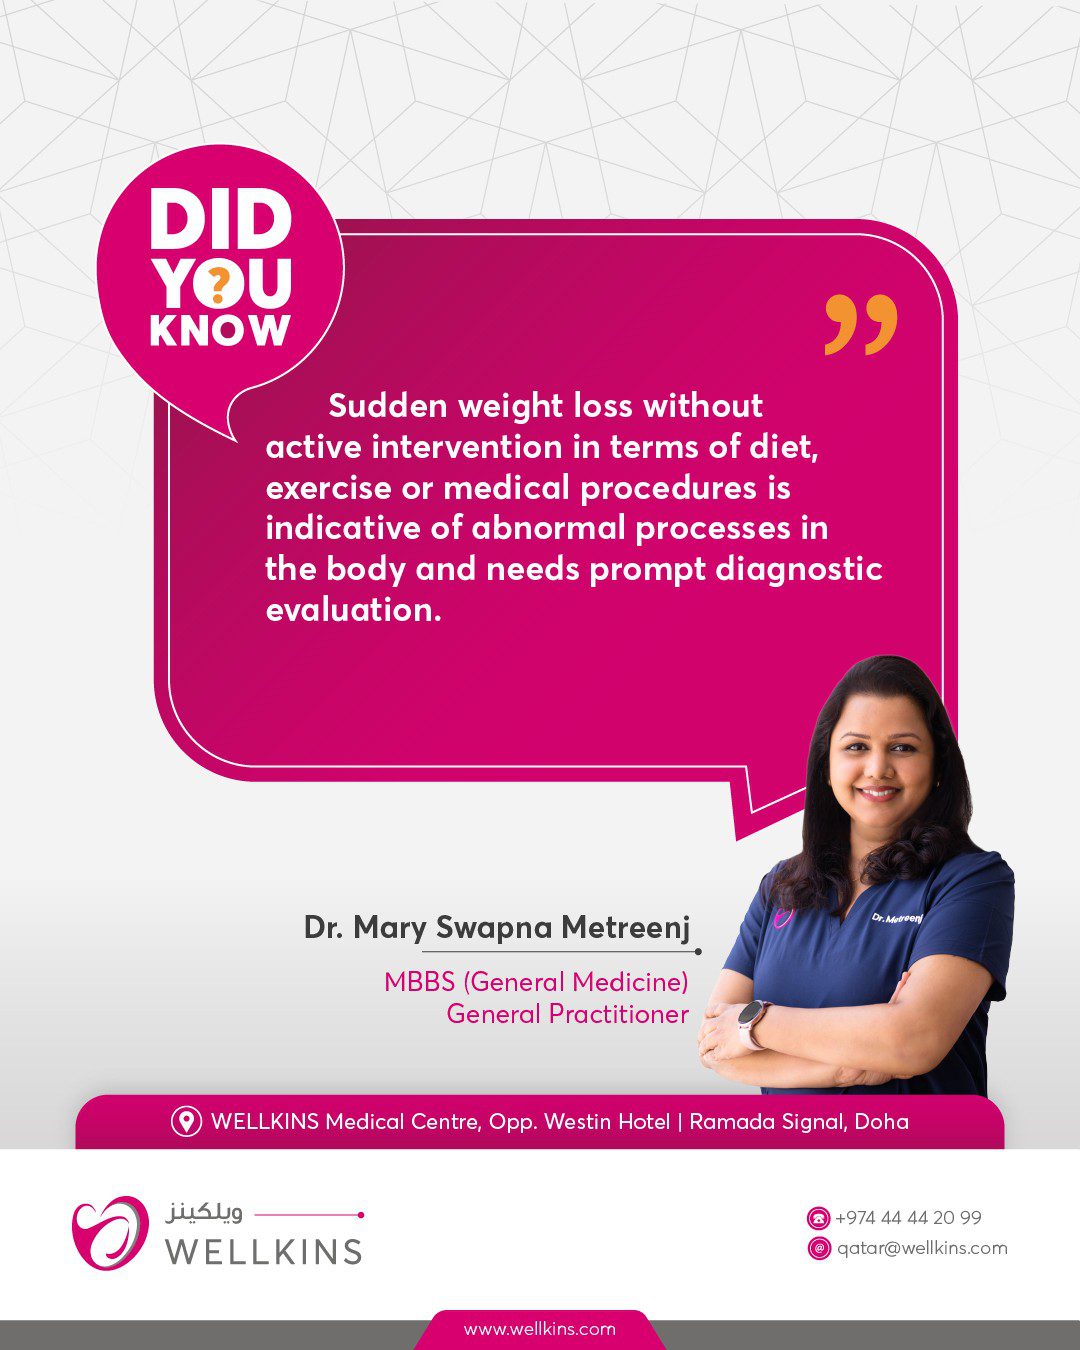 #DidYouKnow 

''Sudden weight loss without active intervention in terms of diet, exercise or medical procedures is indicative of abnormal processes in the body and needs prompt diagnostic evaluation.''- Dr.Mary Swapna Metreenj (General Practitioner @ WELLKINS Medical Centre).
_______________________________

To learn more about #WELLKINSQATAR and our services, kindly visit our website www.wellkins.com
Helpline: 4444 2099 
_______________________________

#Wellkinsqatar #wellkins #medicalcentre #Qatar2022